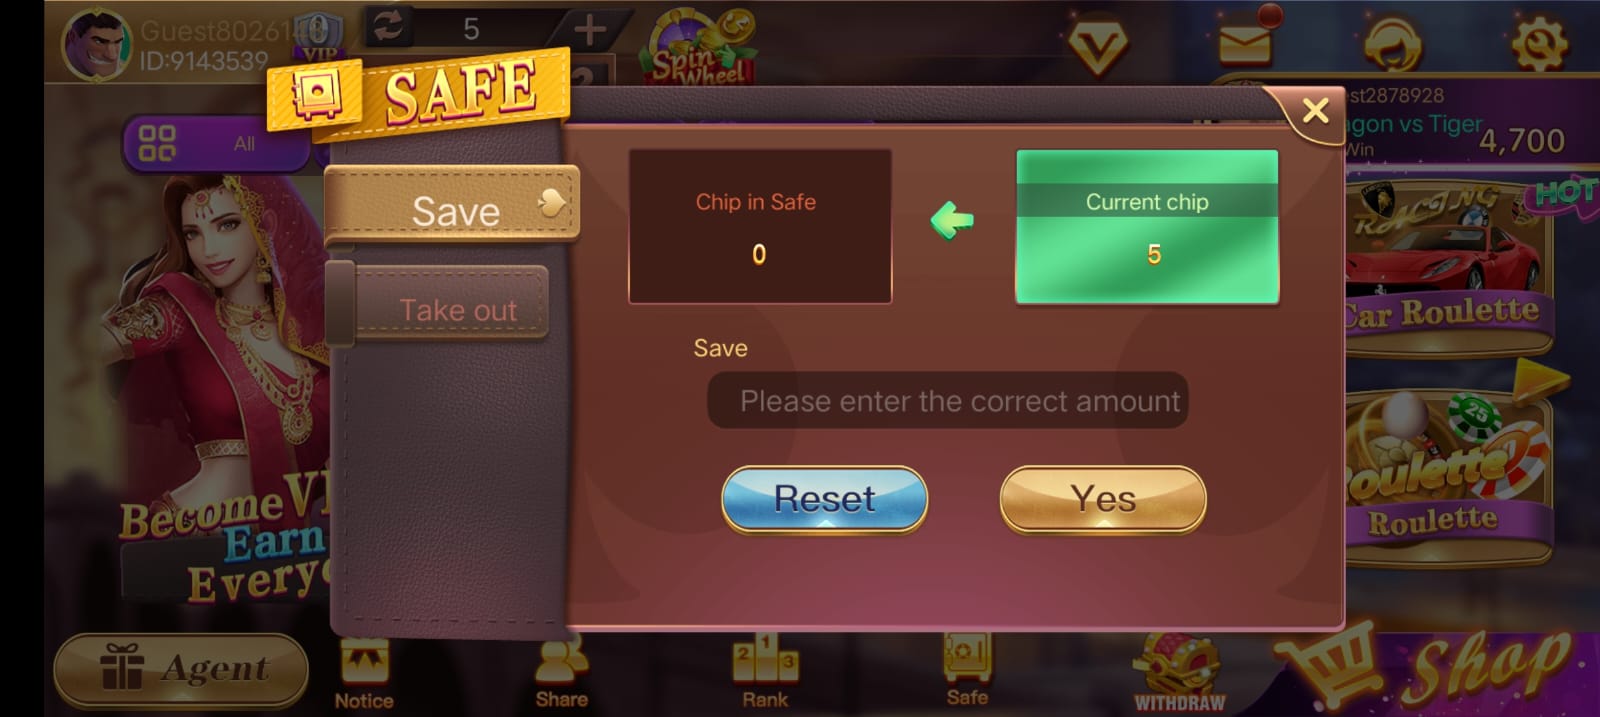 Safe Button Program In Rummy Moment App ?